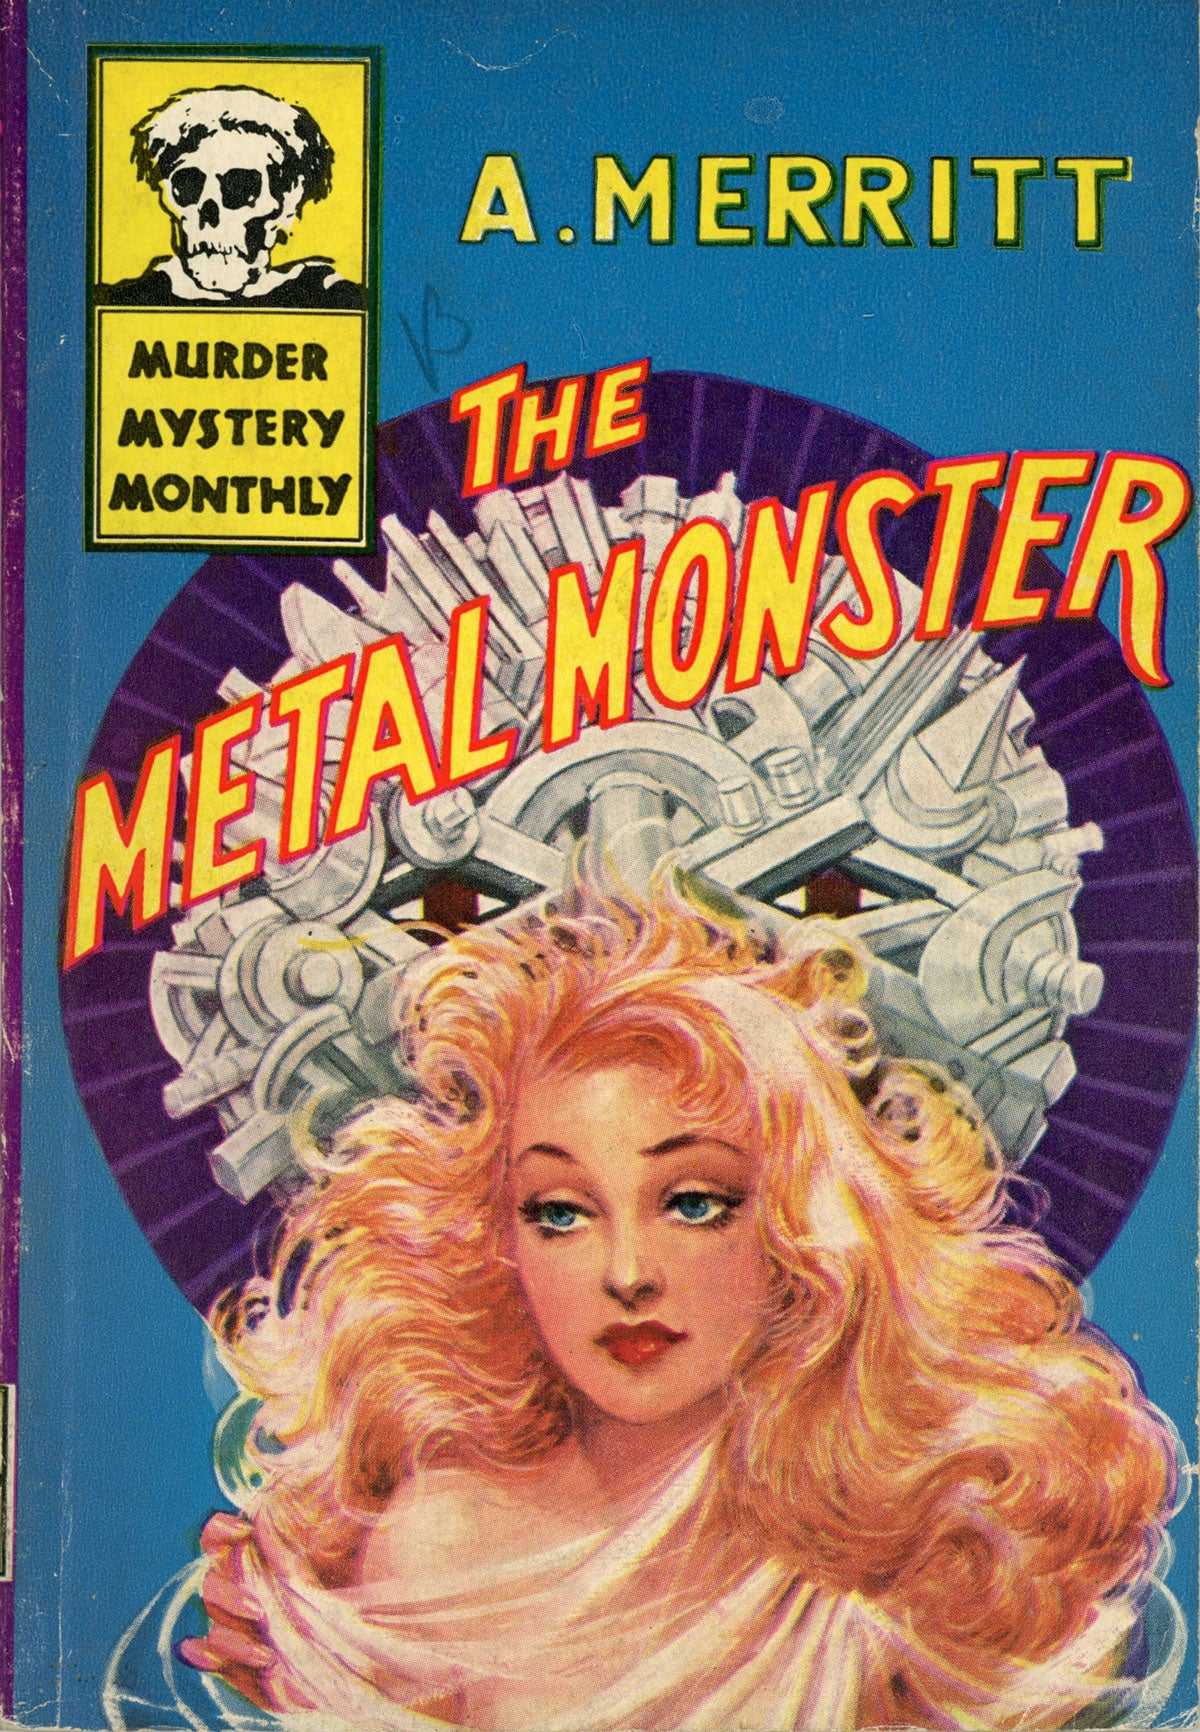 THE METAL MONSTER by Merritt on L. W. Currey, Inc